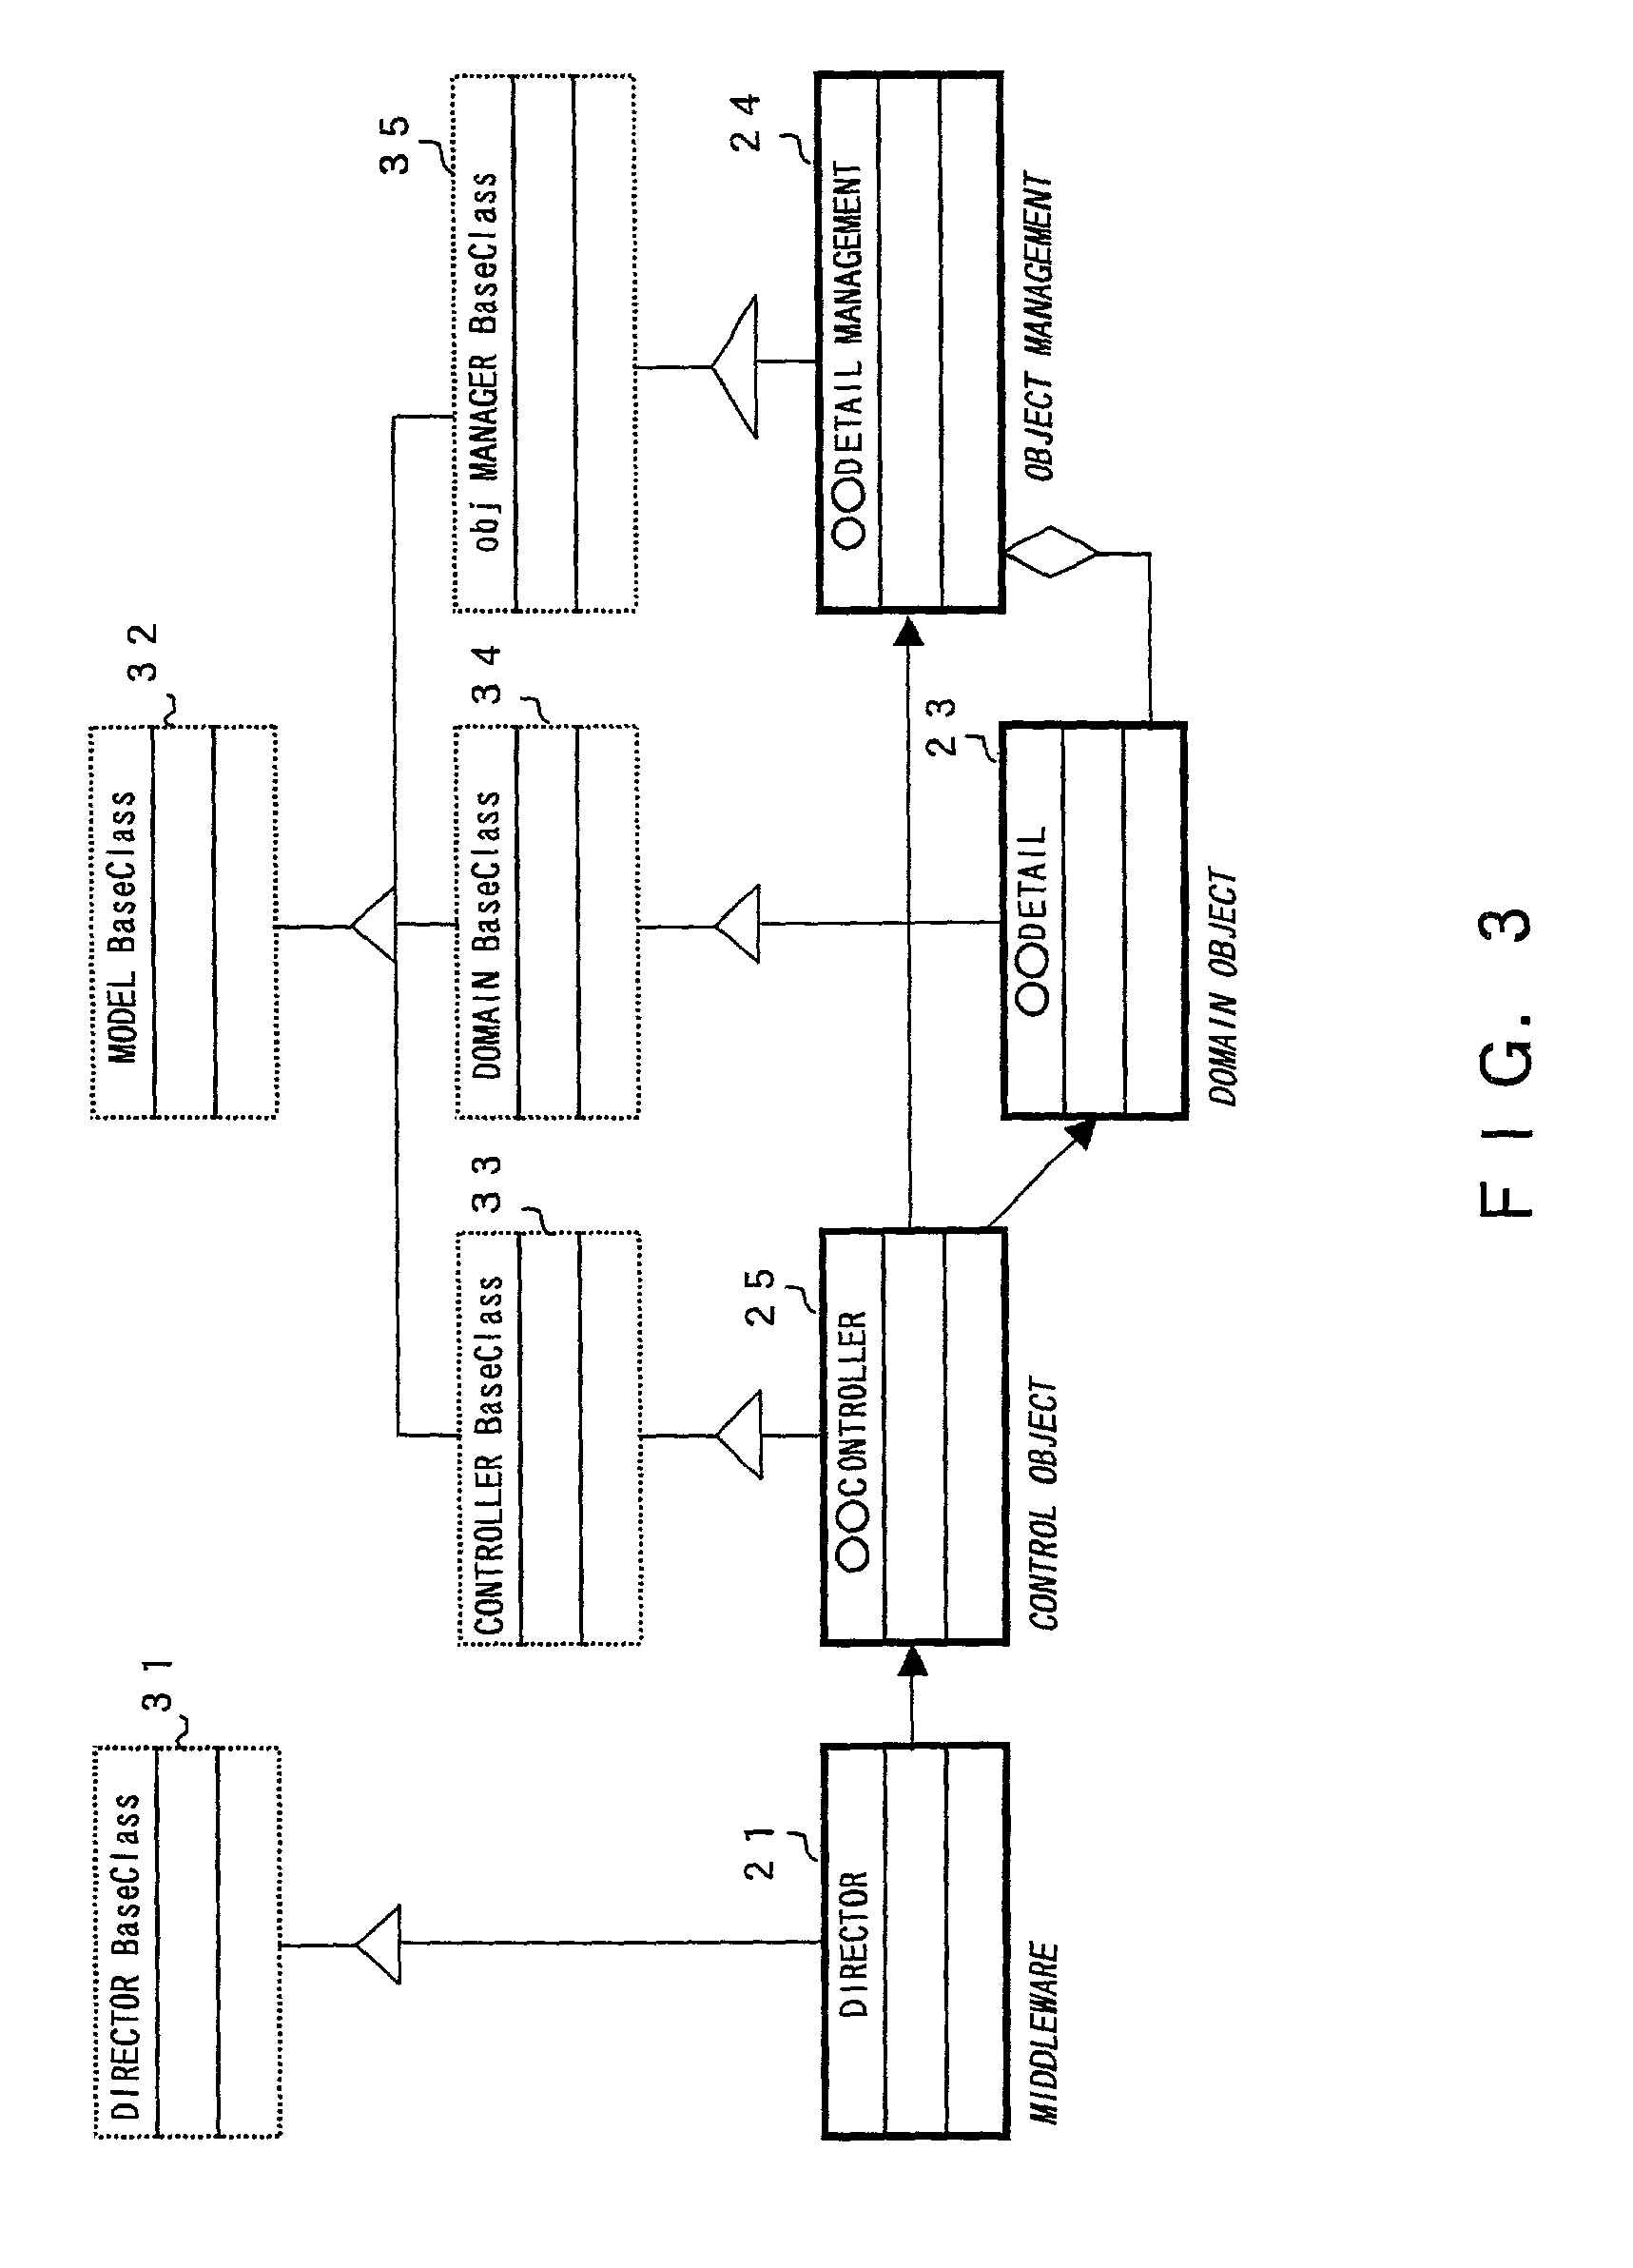 Object-oriented business system and method